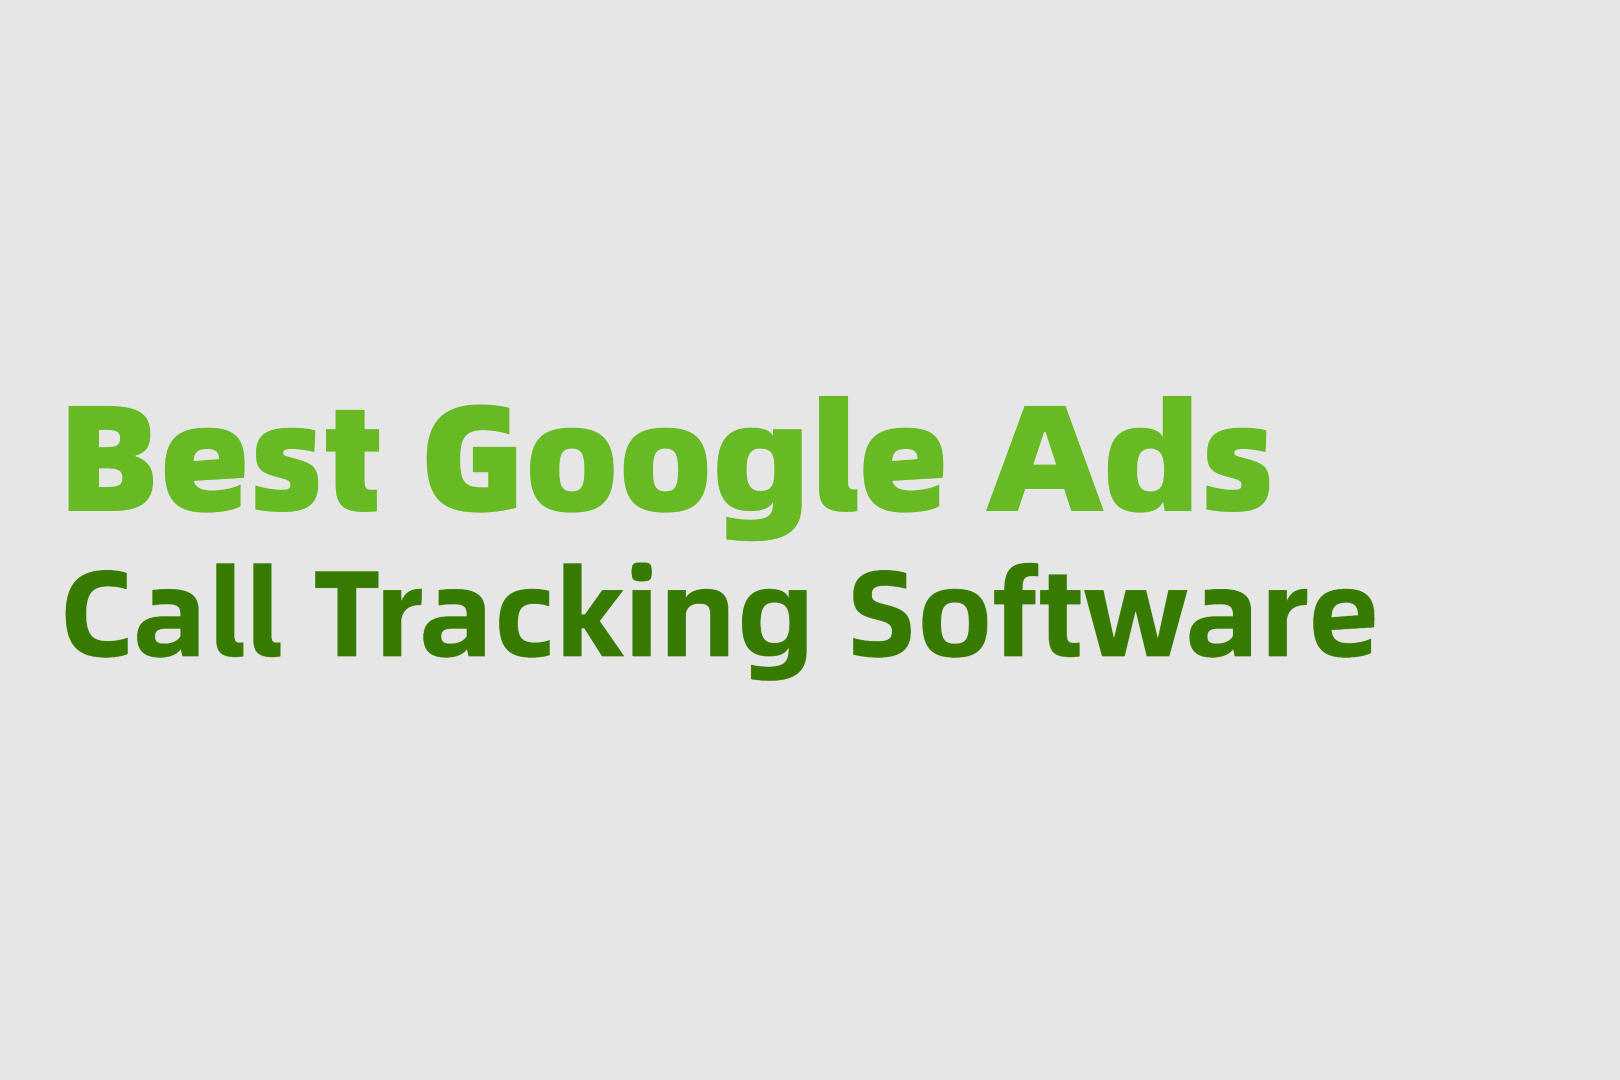 Best Google Ads Call Tracking Software